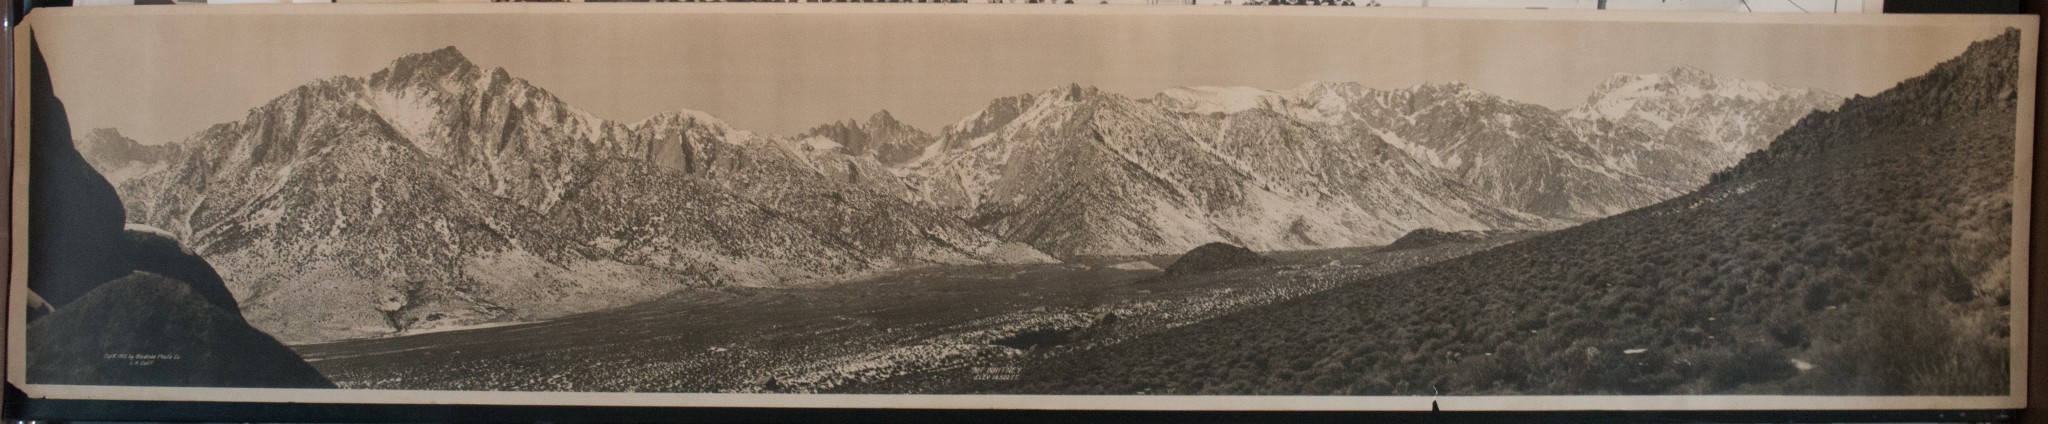 Mount Whitney, California from the Inyo Mountains near Lone Pine, 1913.